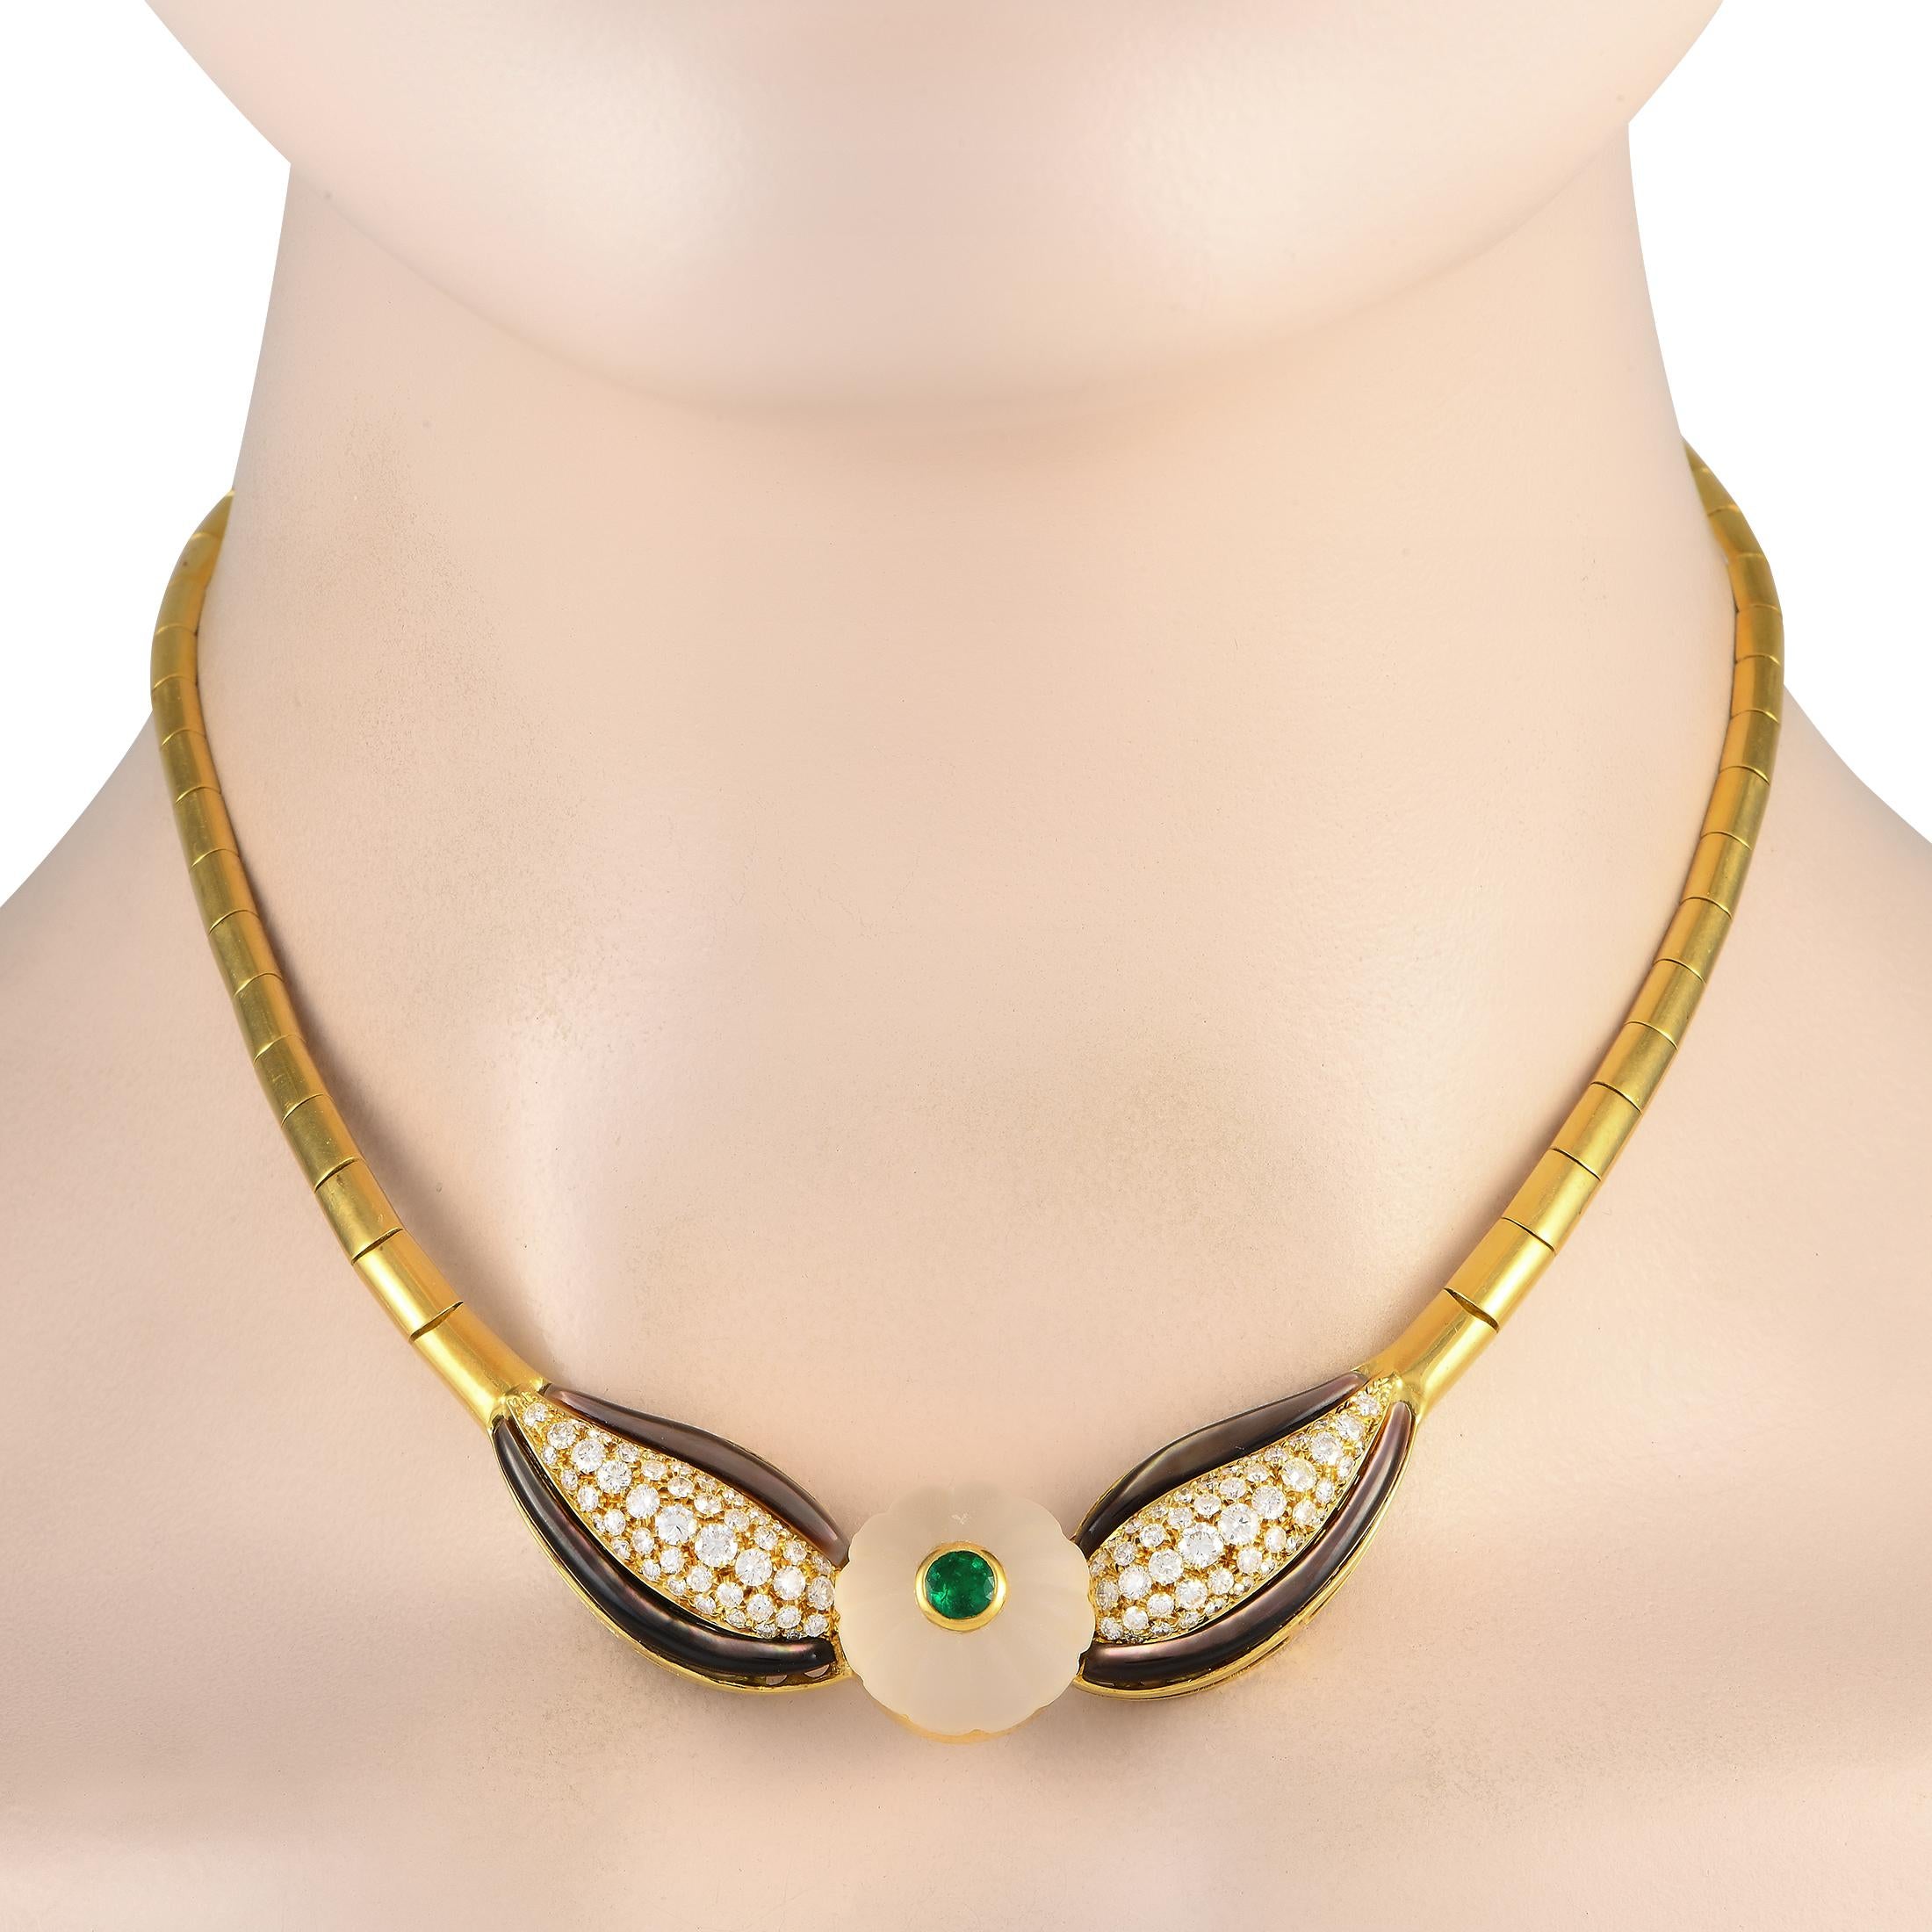 Fancy some drama in your wardrobe? Bring the allure of the 80s through this vintage Bvlgari necklace. The necklace is composed of half-round bar links, in 18K yellow gold, leading to a decorative center. Taking centerstage is a domed and fluted rock